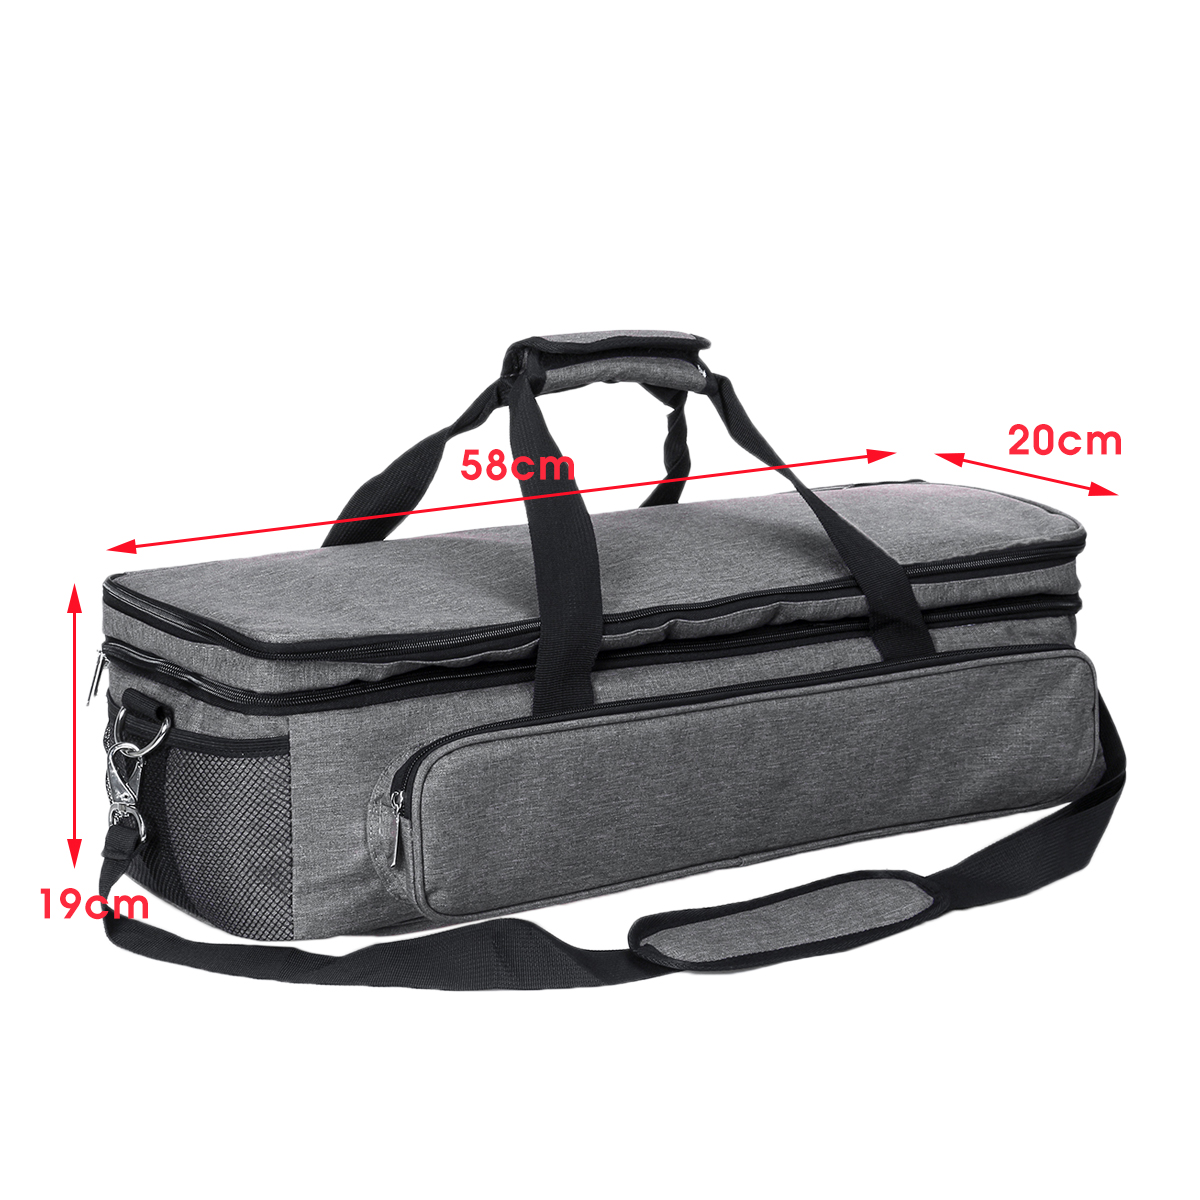 Portable-600D-Oxford-Cloth-Cutting-Machine-Carrying-Storage-Bag-Tool-Travel-Case-1618038-9